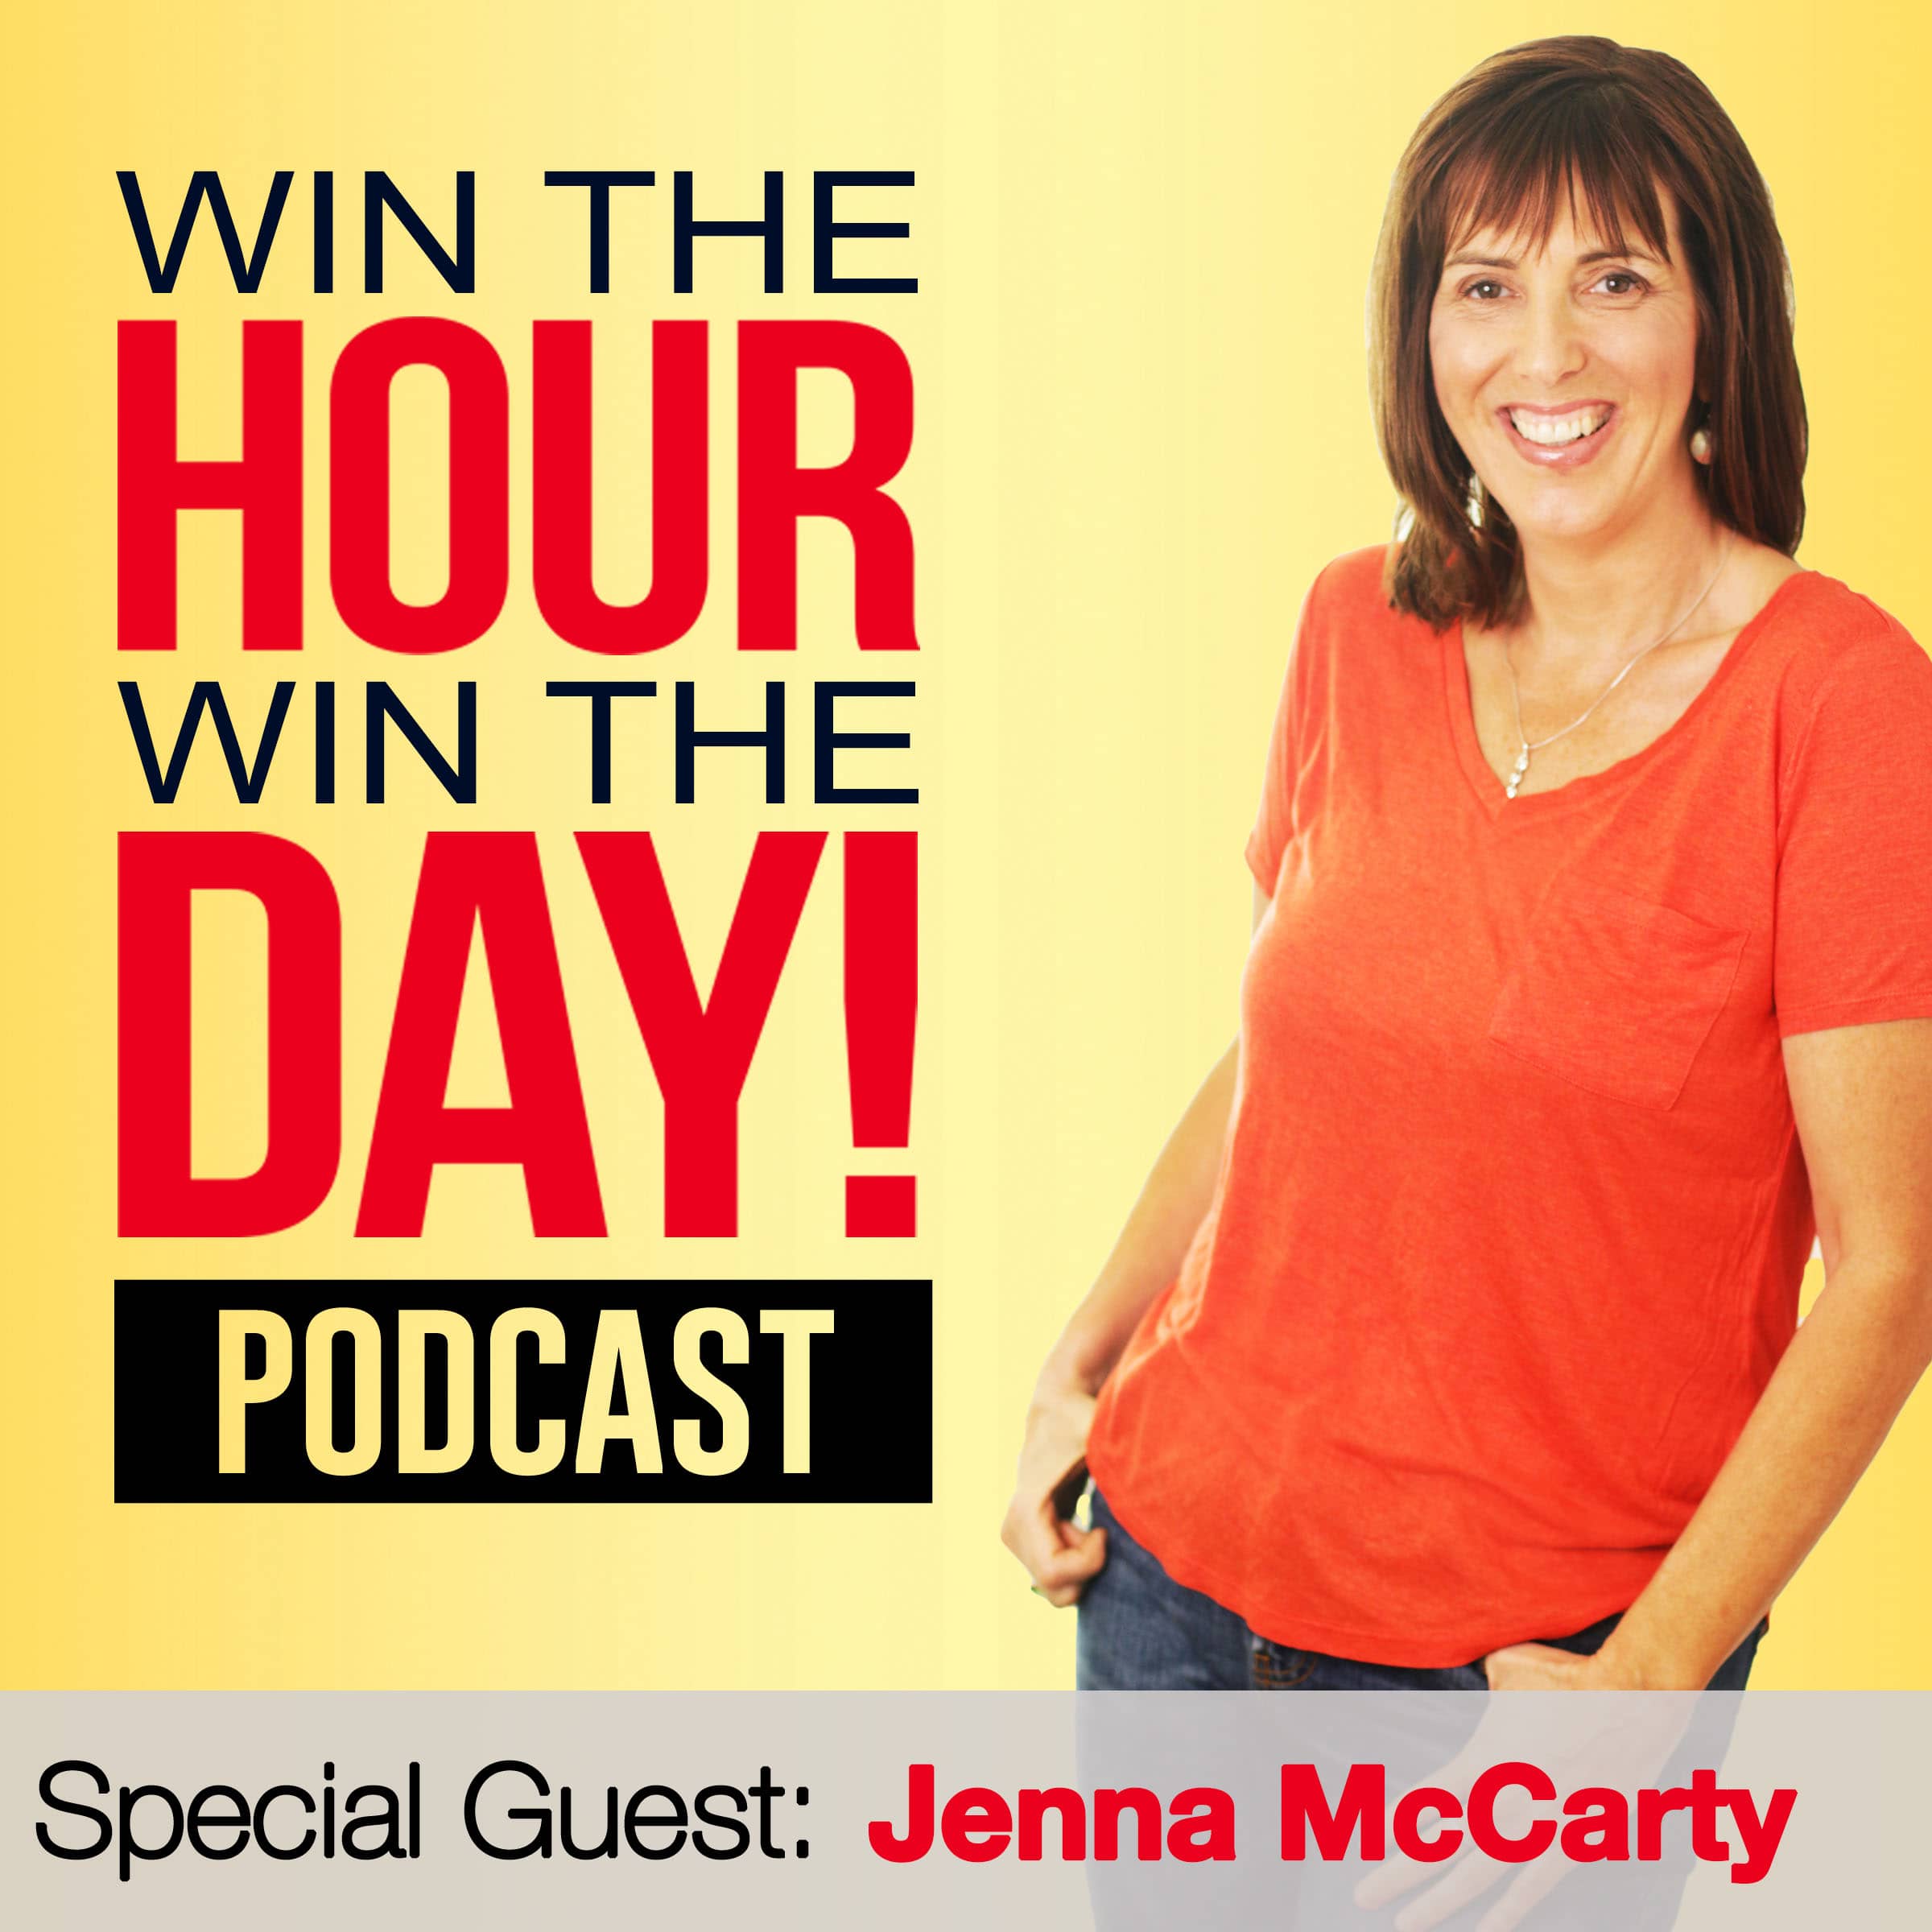 How To Be A Control Freak And Build A Team! With Jenna McCarty